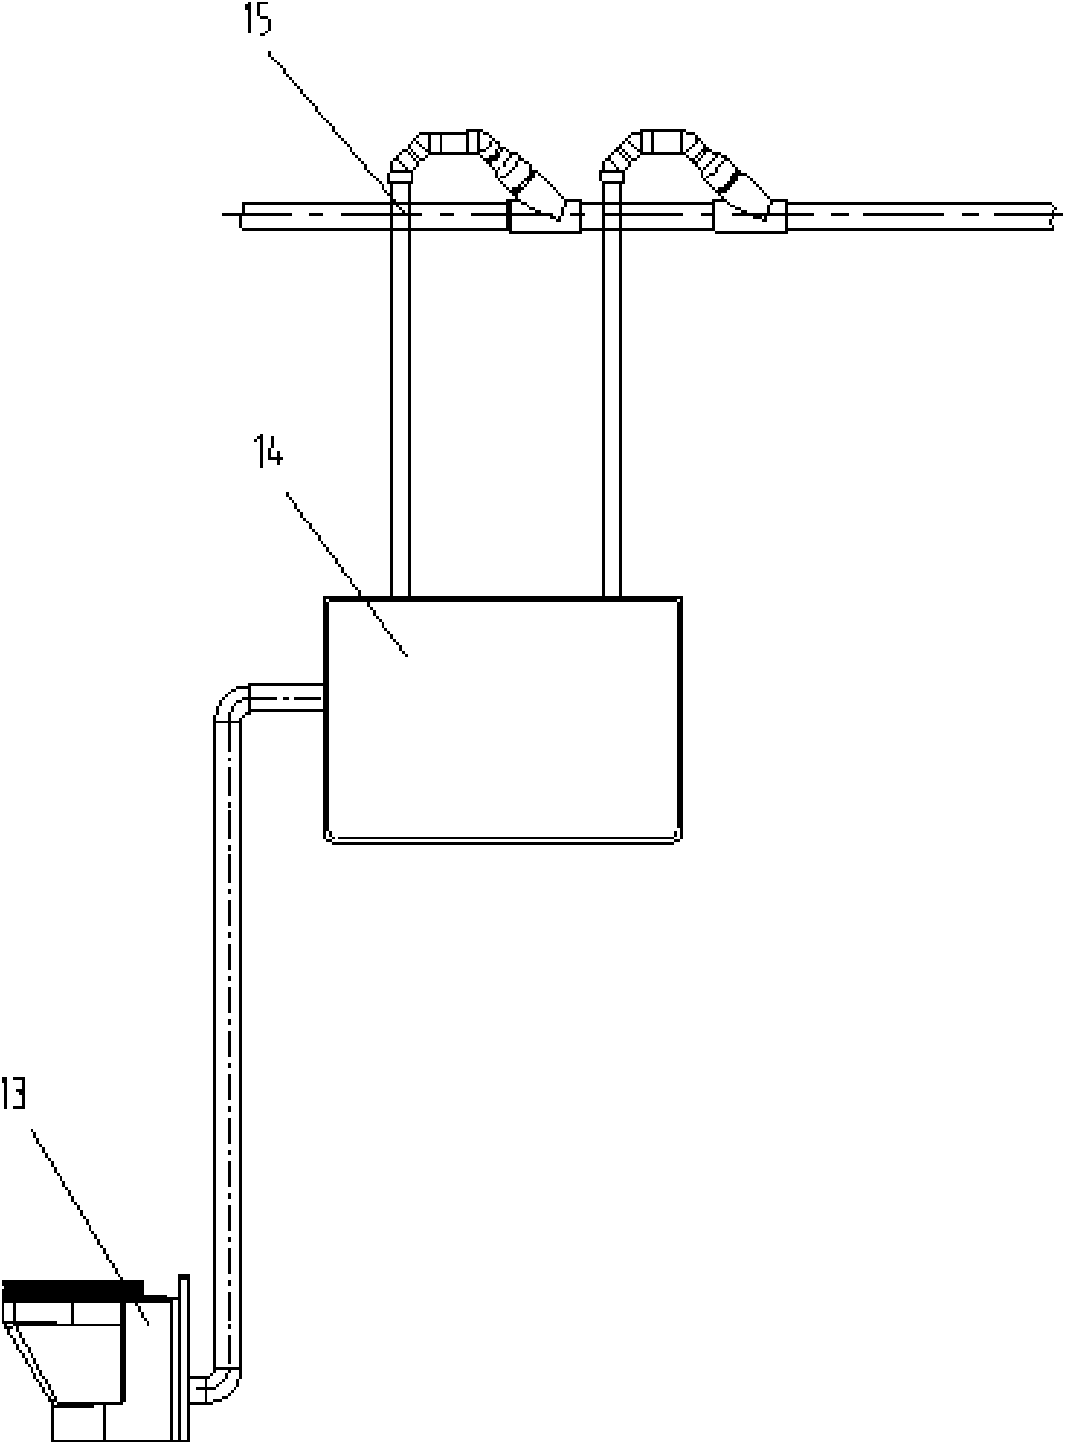 Secondary lifting device of vacuum system